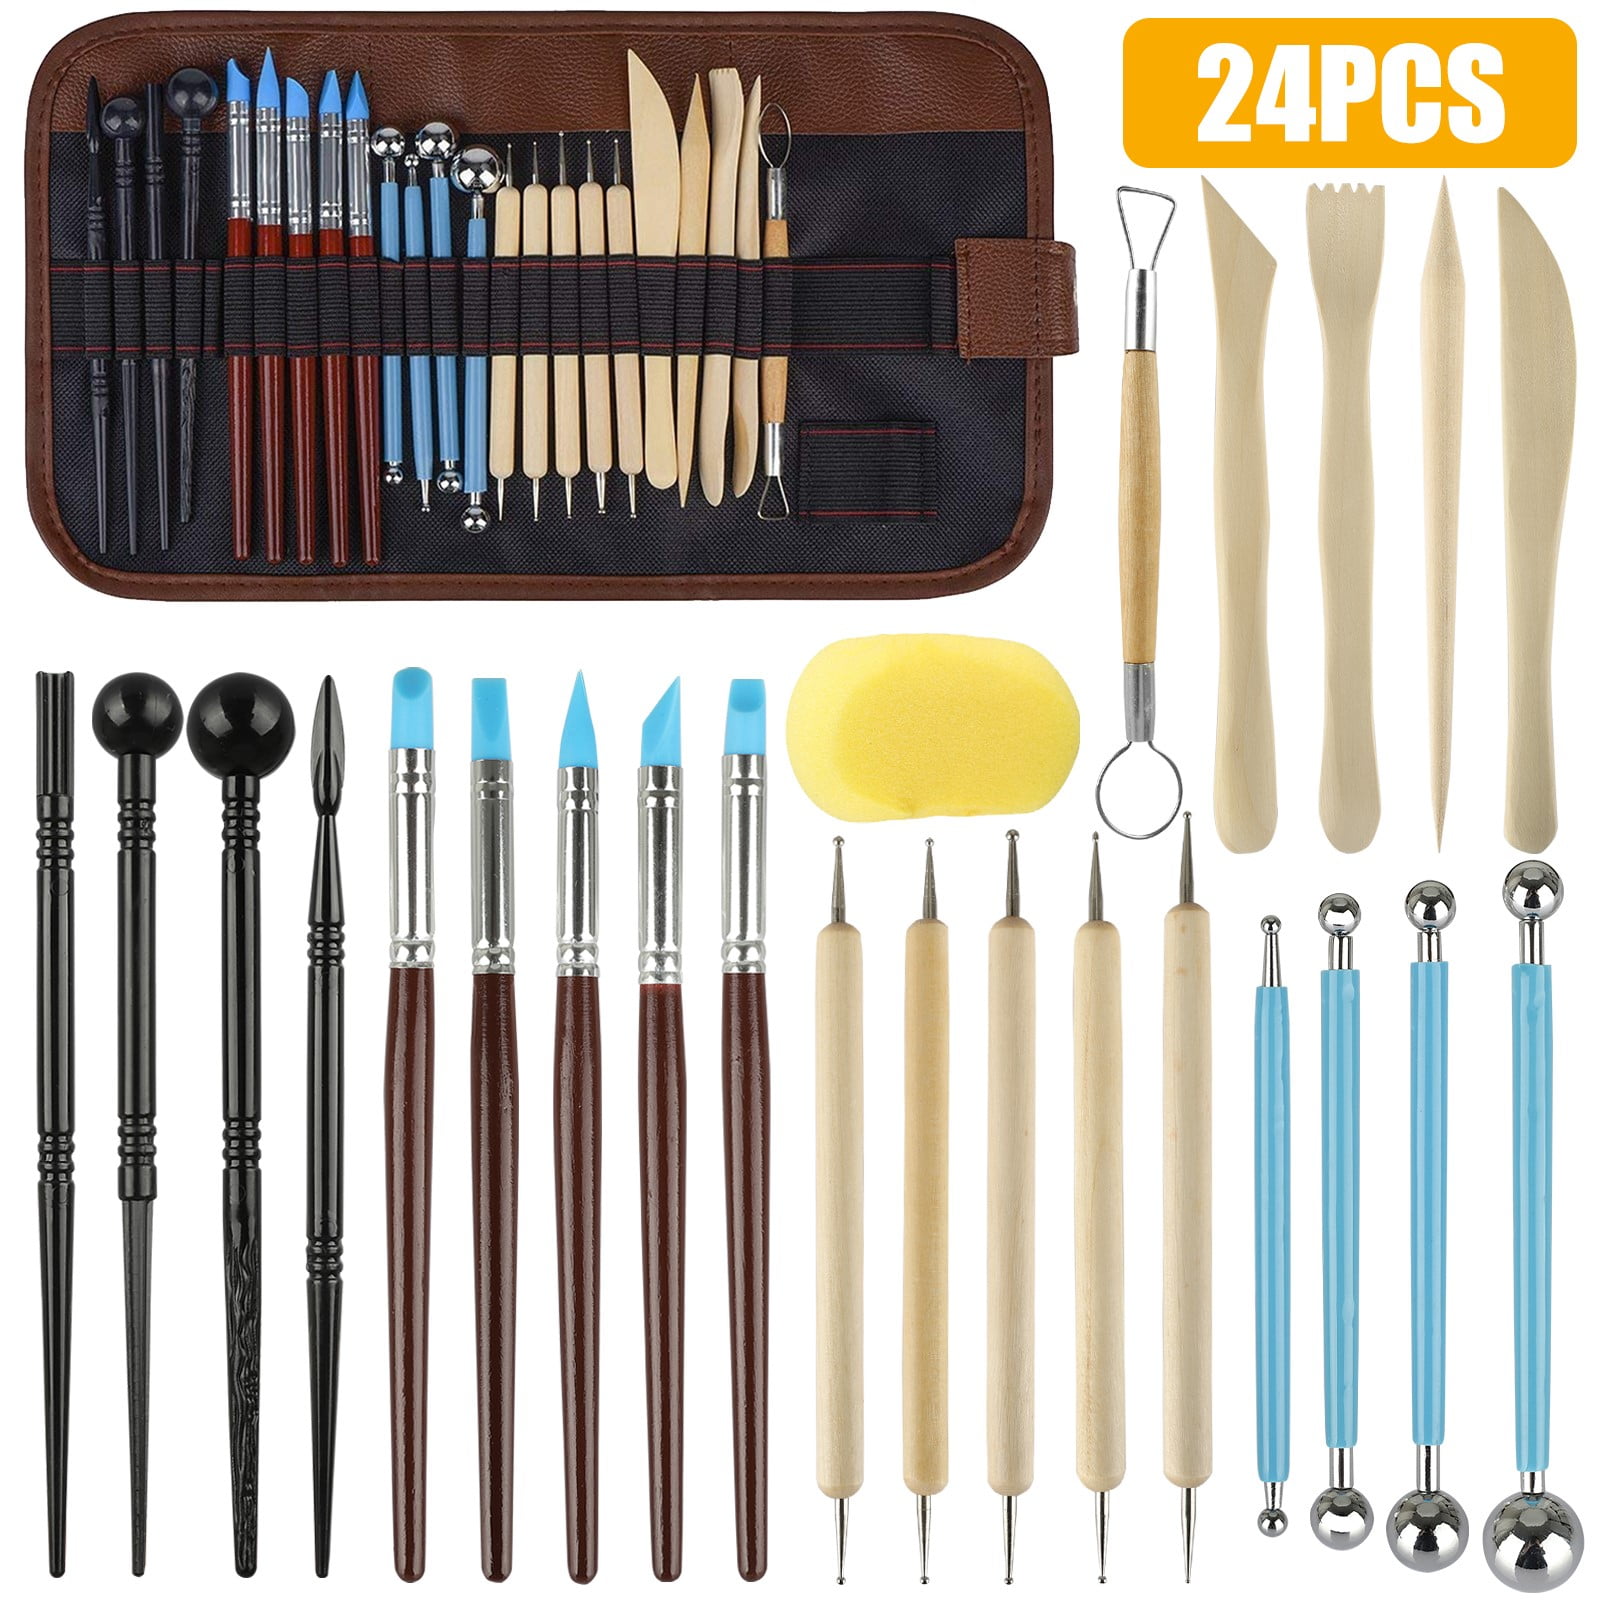 Kit for Modeling Carving Clay and Sculpting Tool Set 7 Elements 22-Piece Pottery and Ceramics